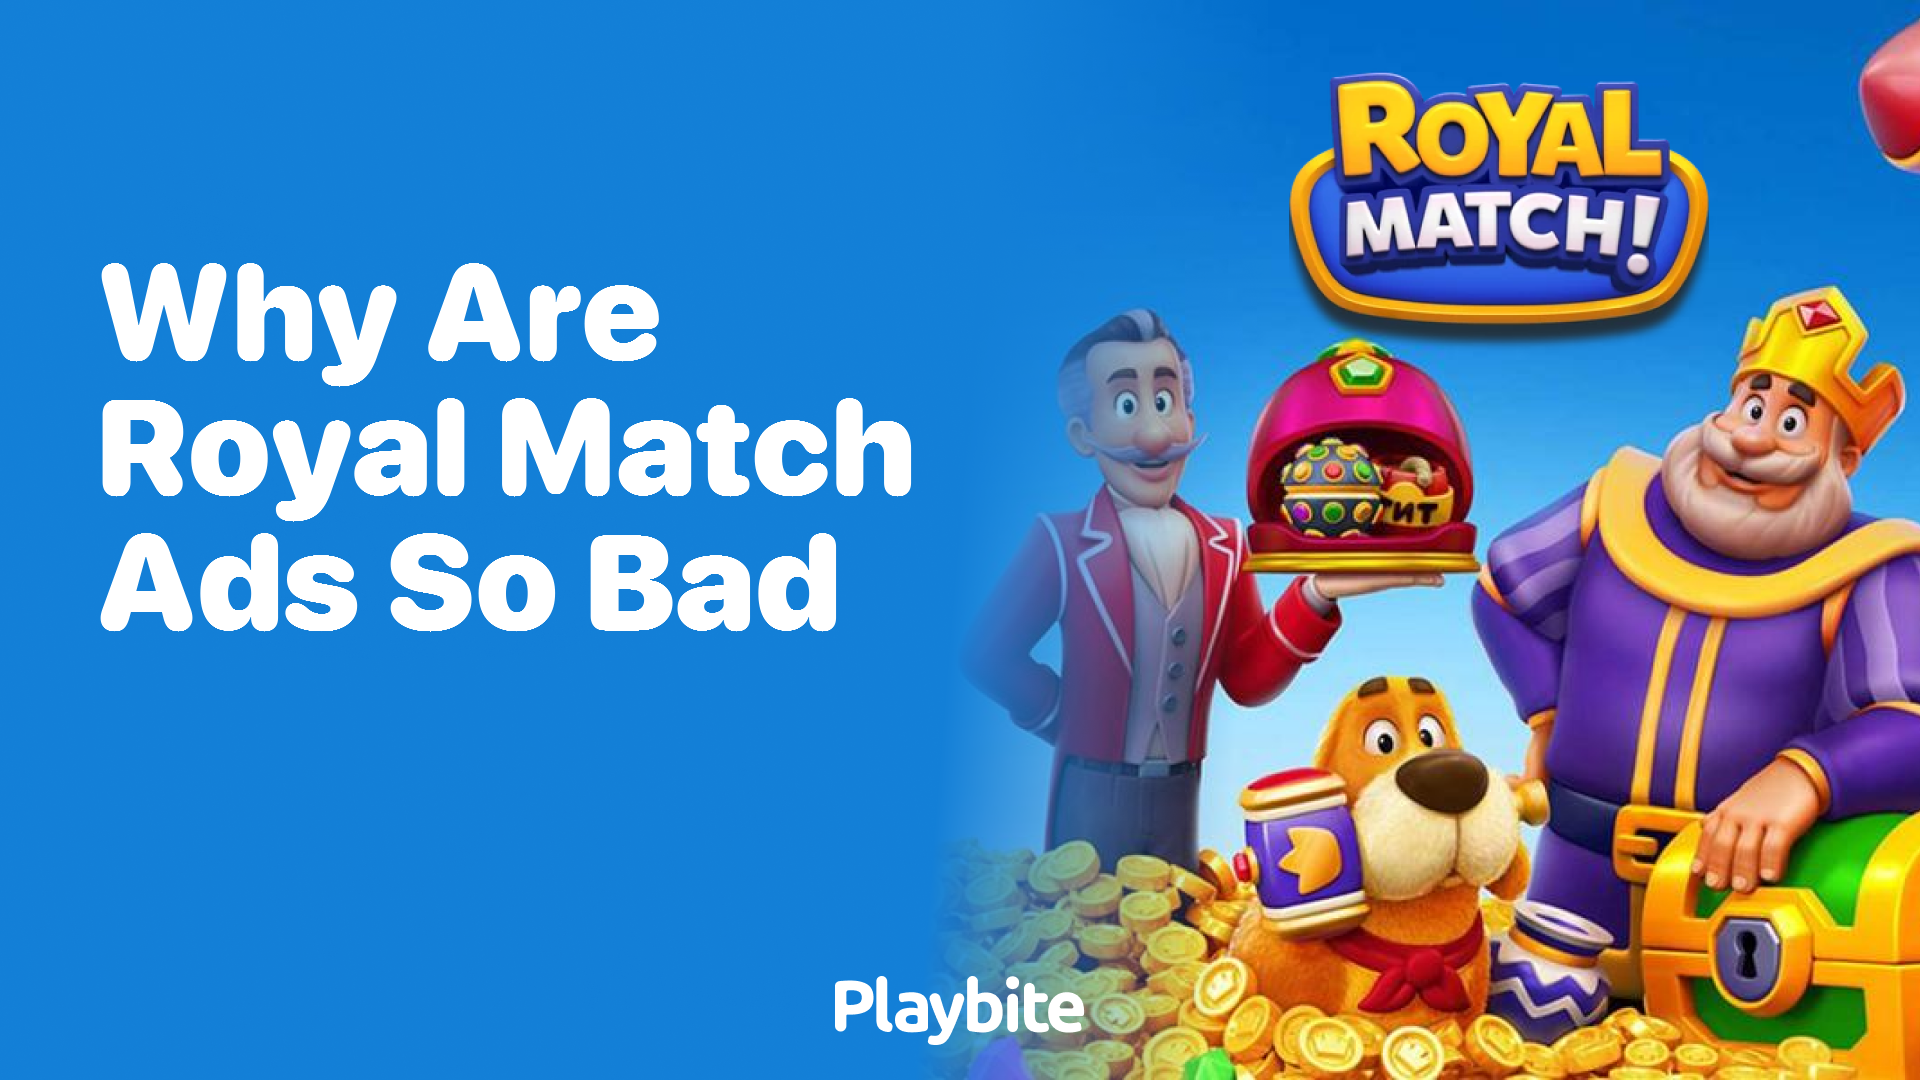 Why Are Royal Match Ads So Bad?